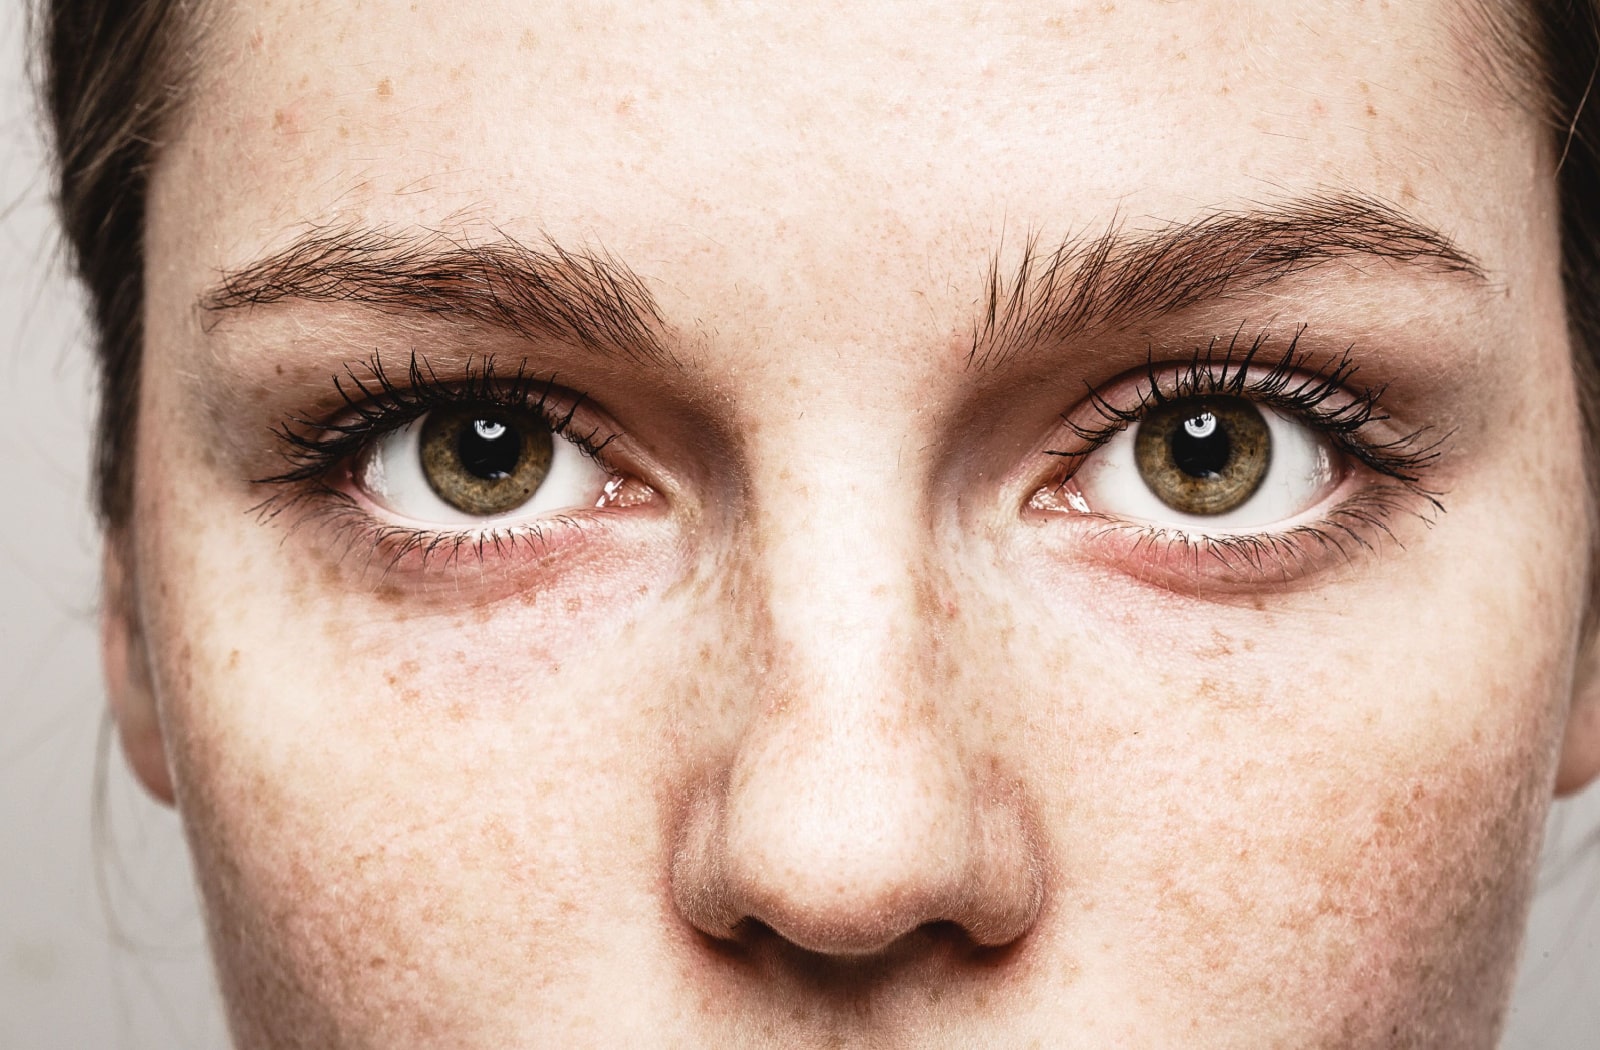 A close up shot of a woman's eyes